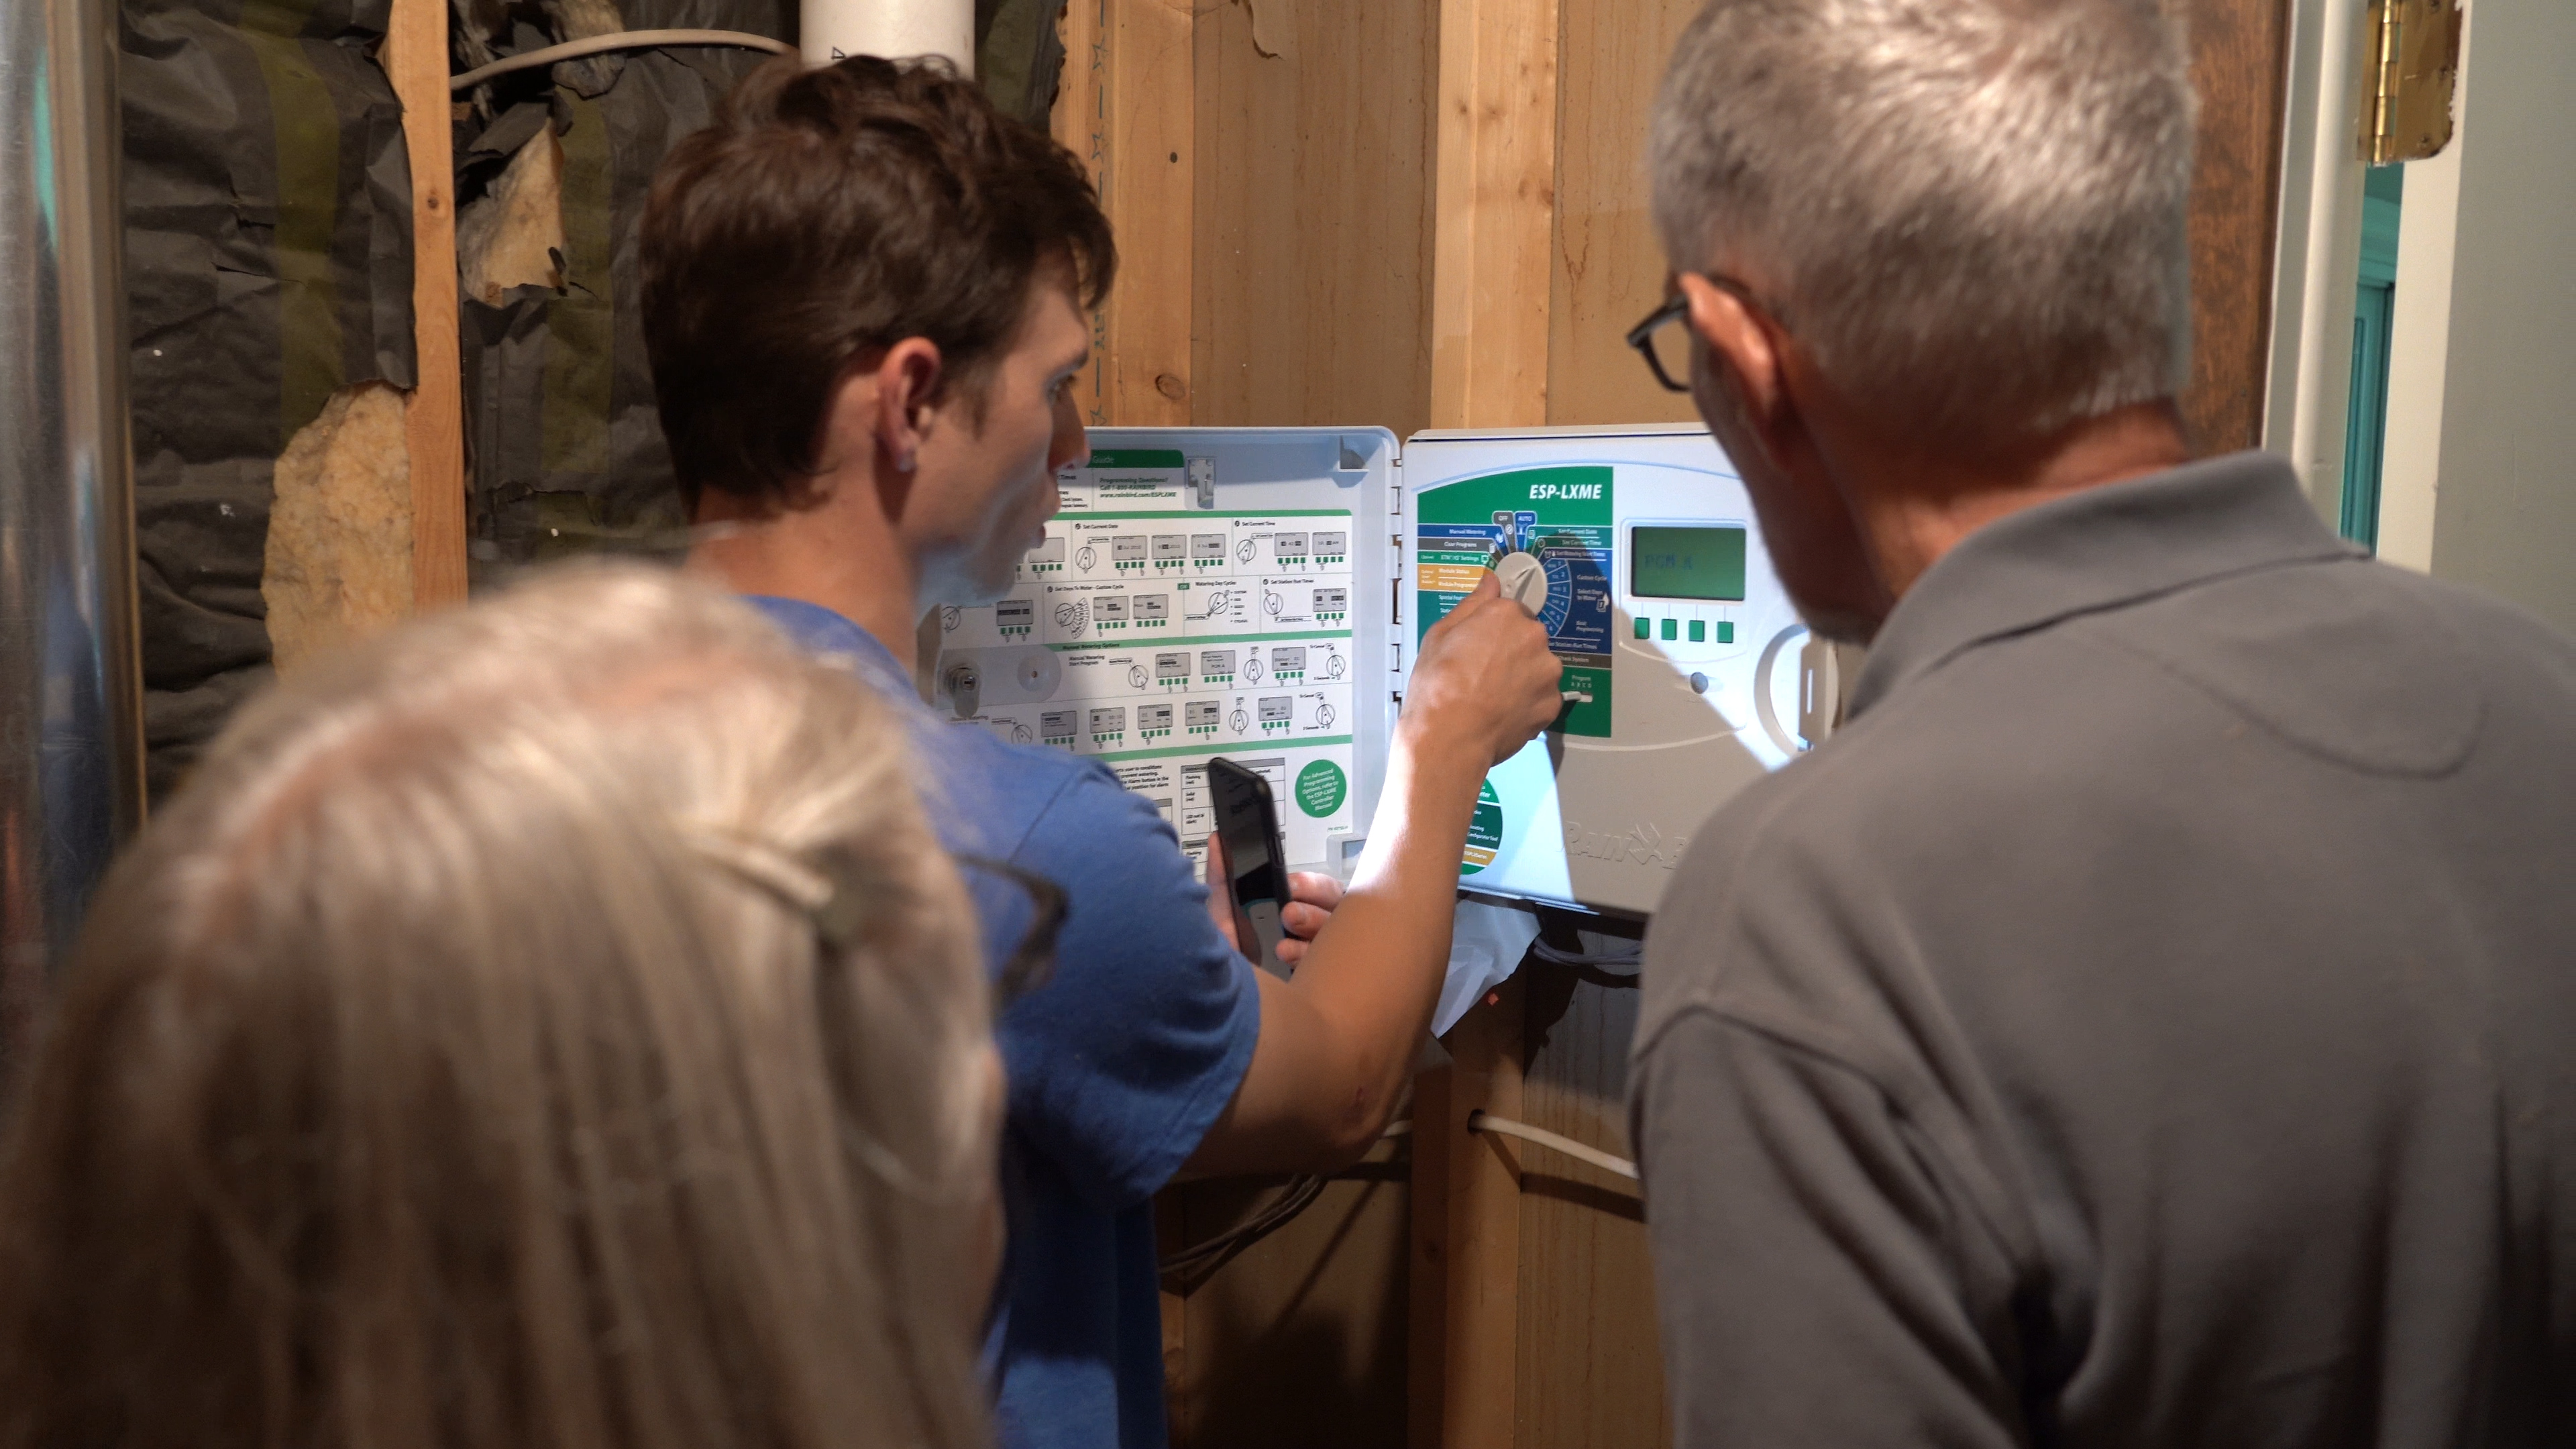 This photo shows a sprinkler technician and homeowners making adjustments to their irrigation system controller.